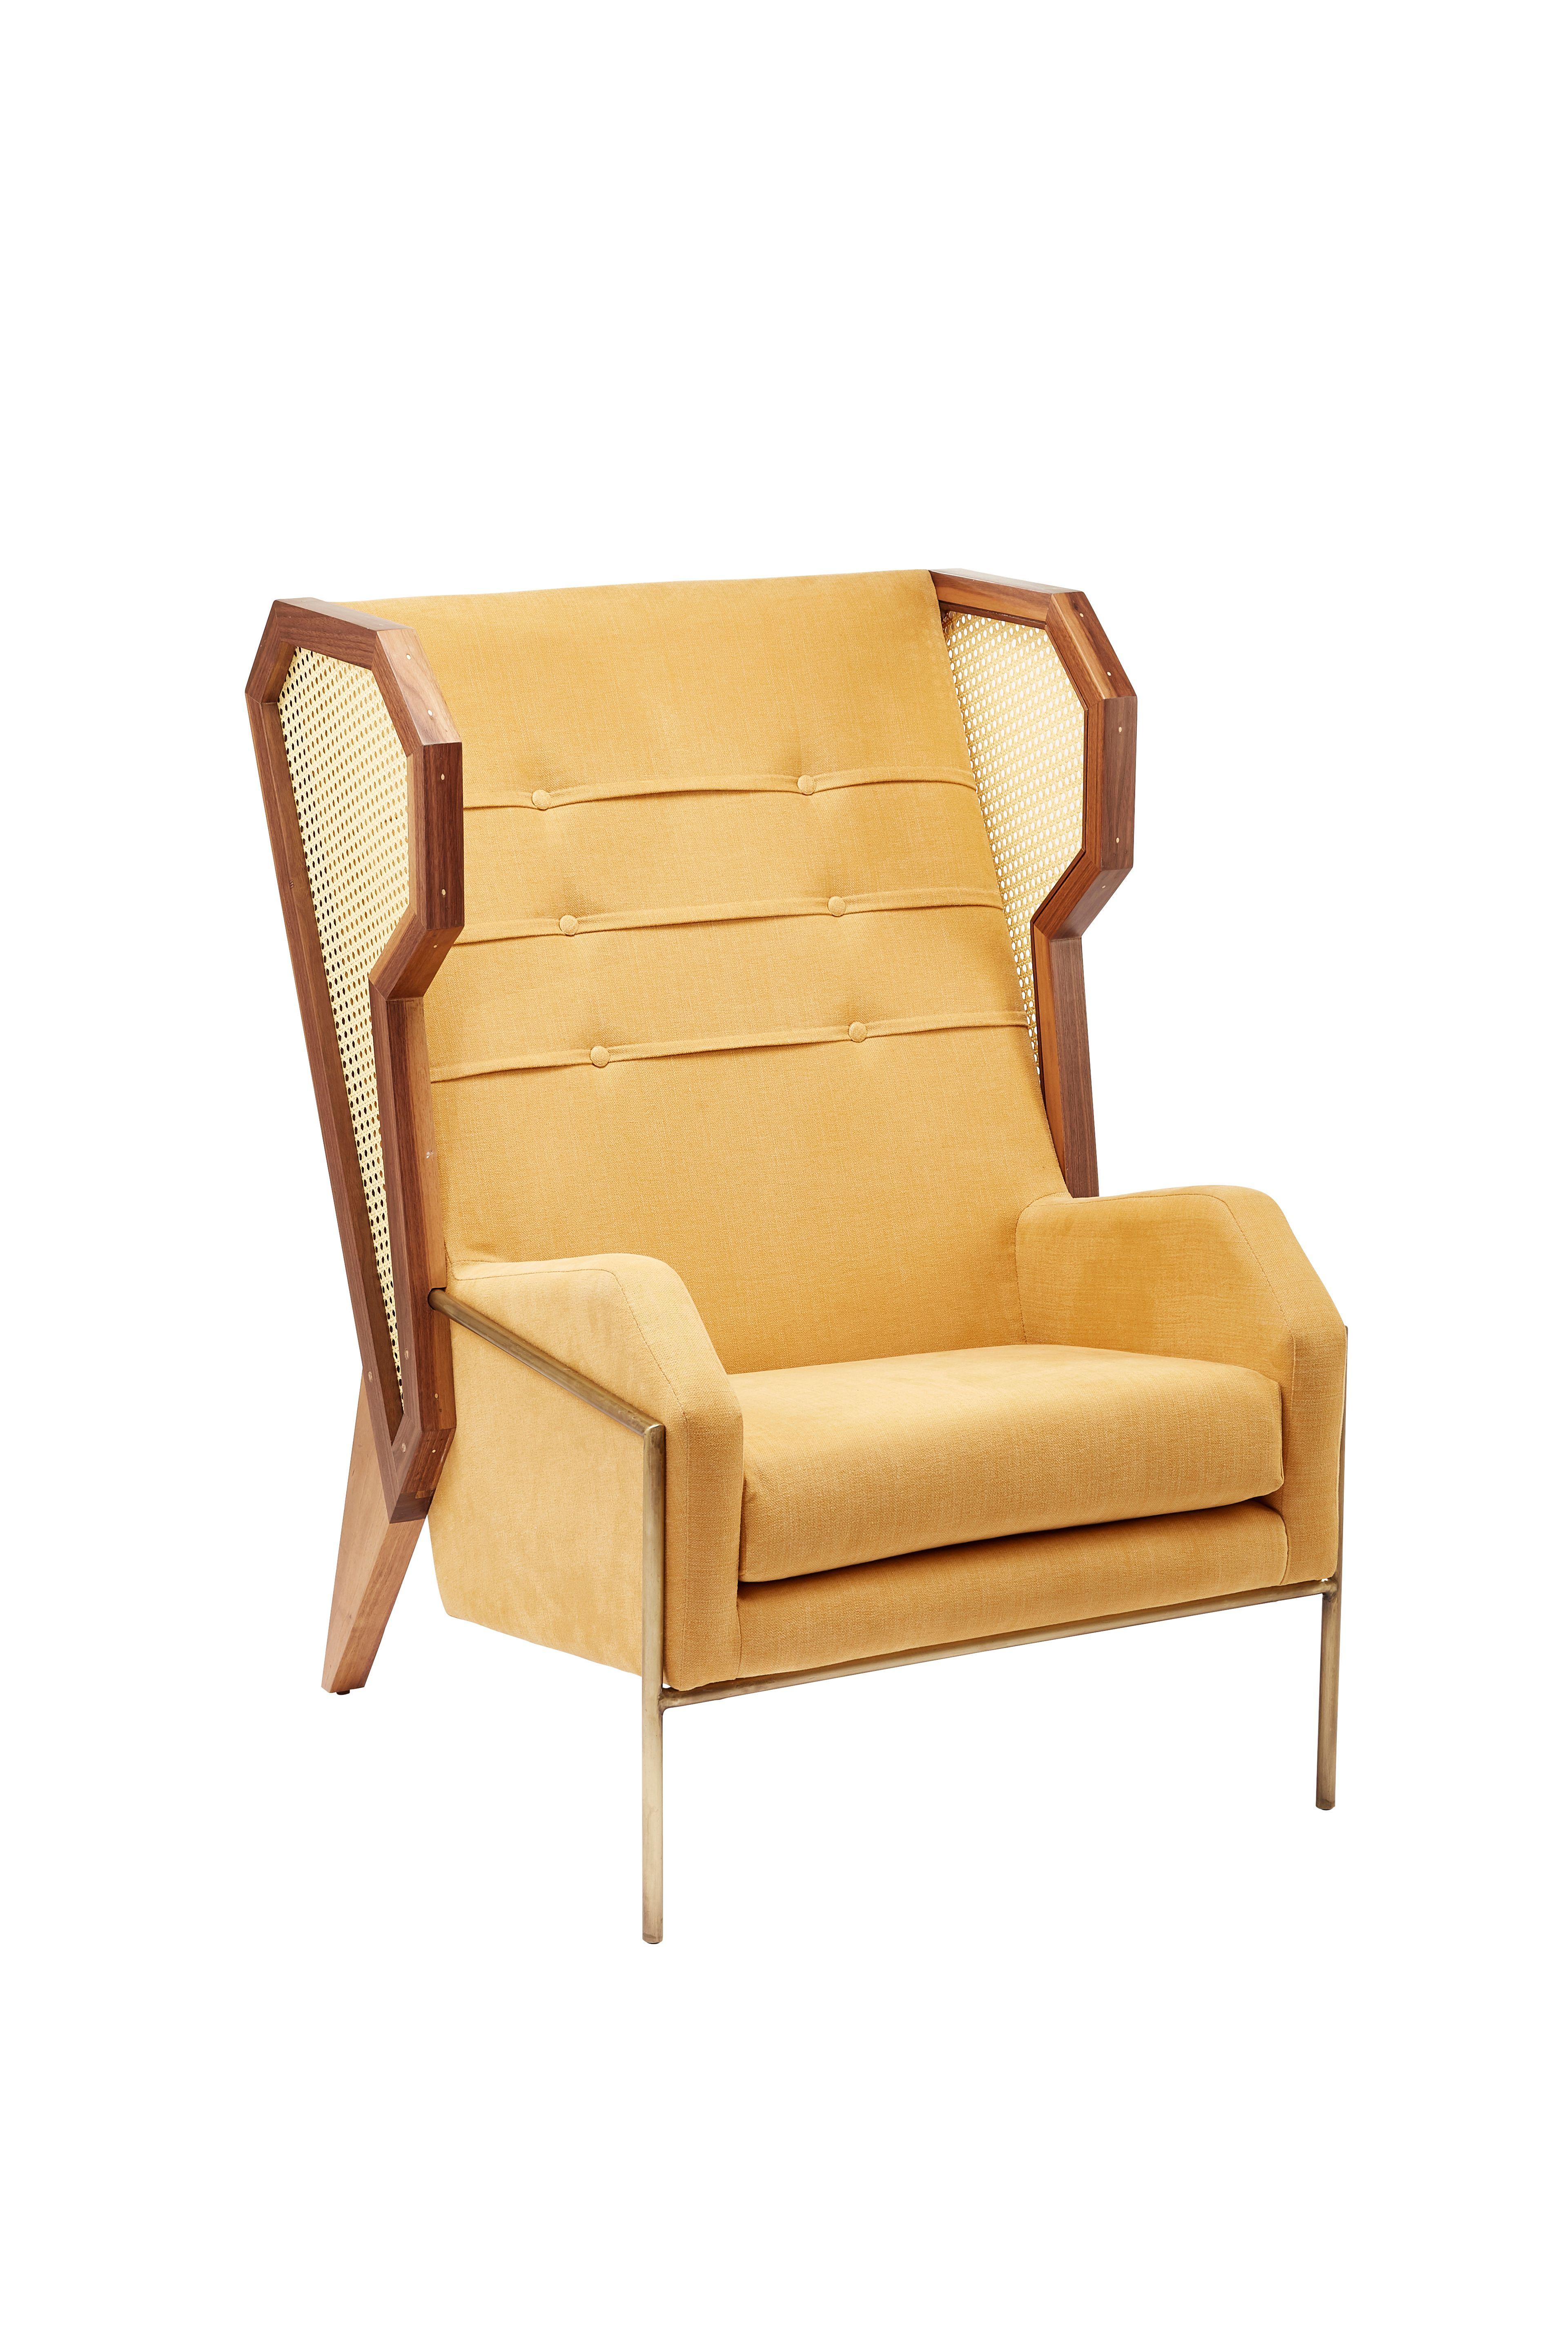 Livingston Wingback by Egg Designs
Dimensions: 73 L X 90 D X 110 H cm
Materials: Walnut Timber, Synthetic Rattan, Linen Upholstery, Bronze Coated Mild Steelwal

Founded by South Africans and life partners, Greg and Roche Dry - Egg is a unique